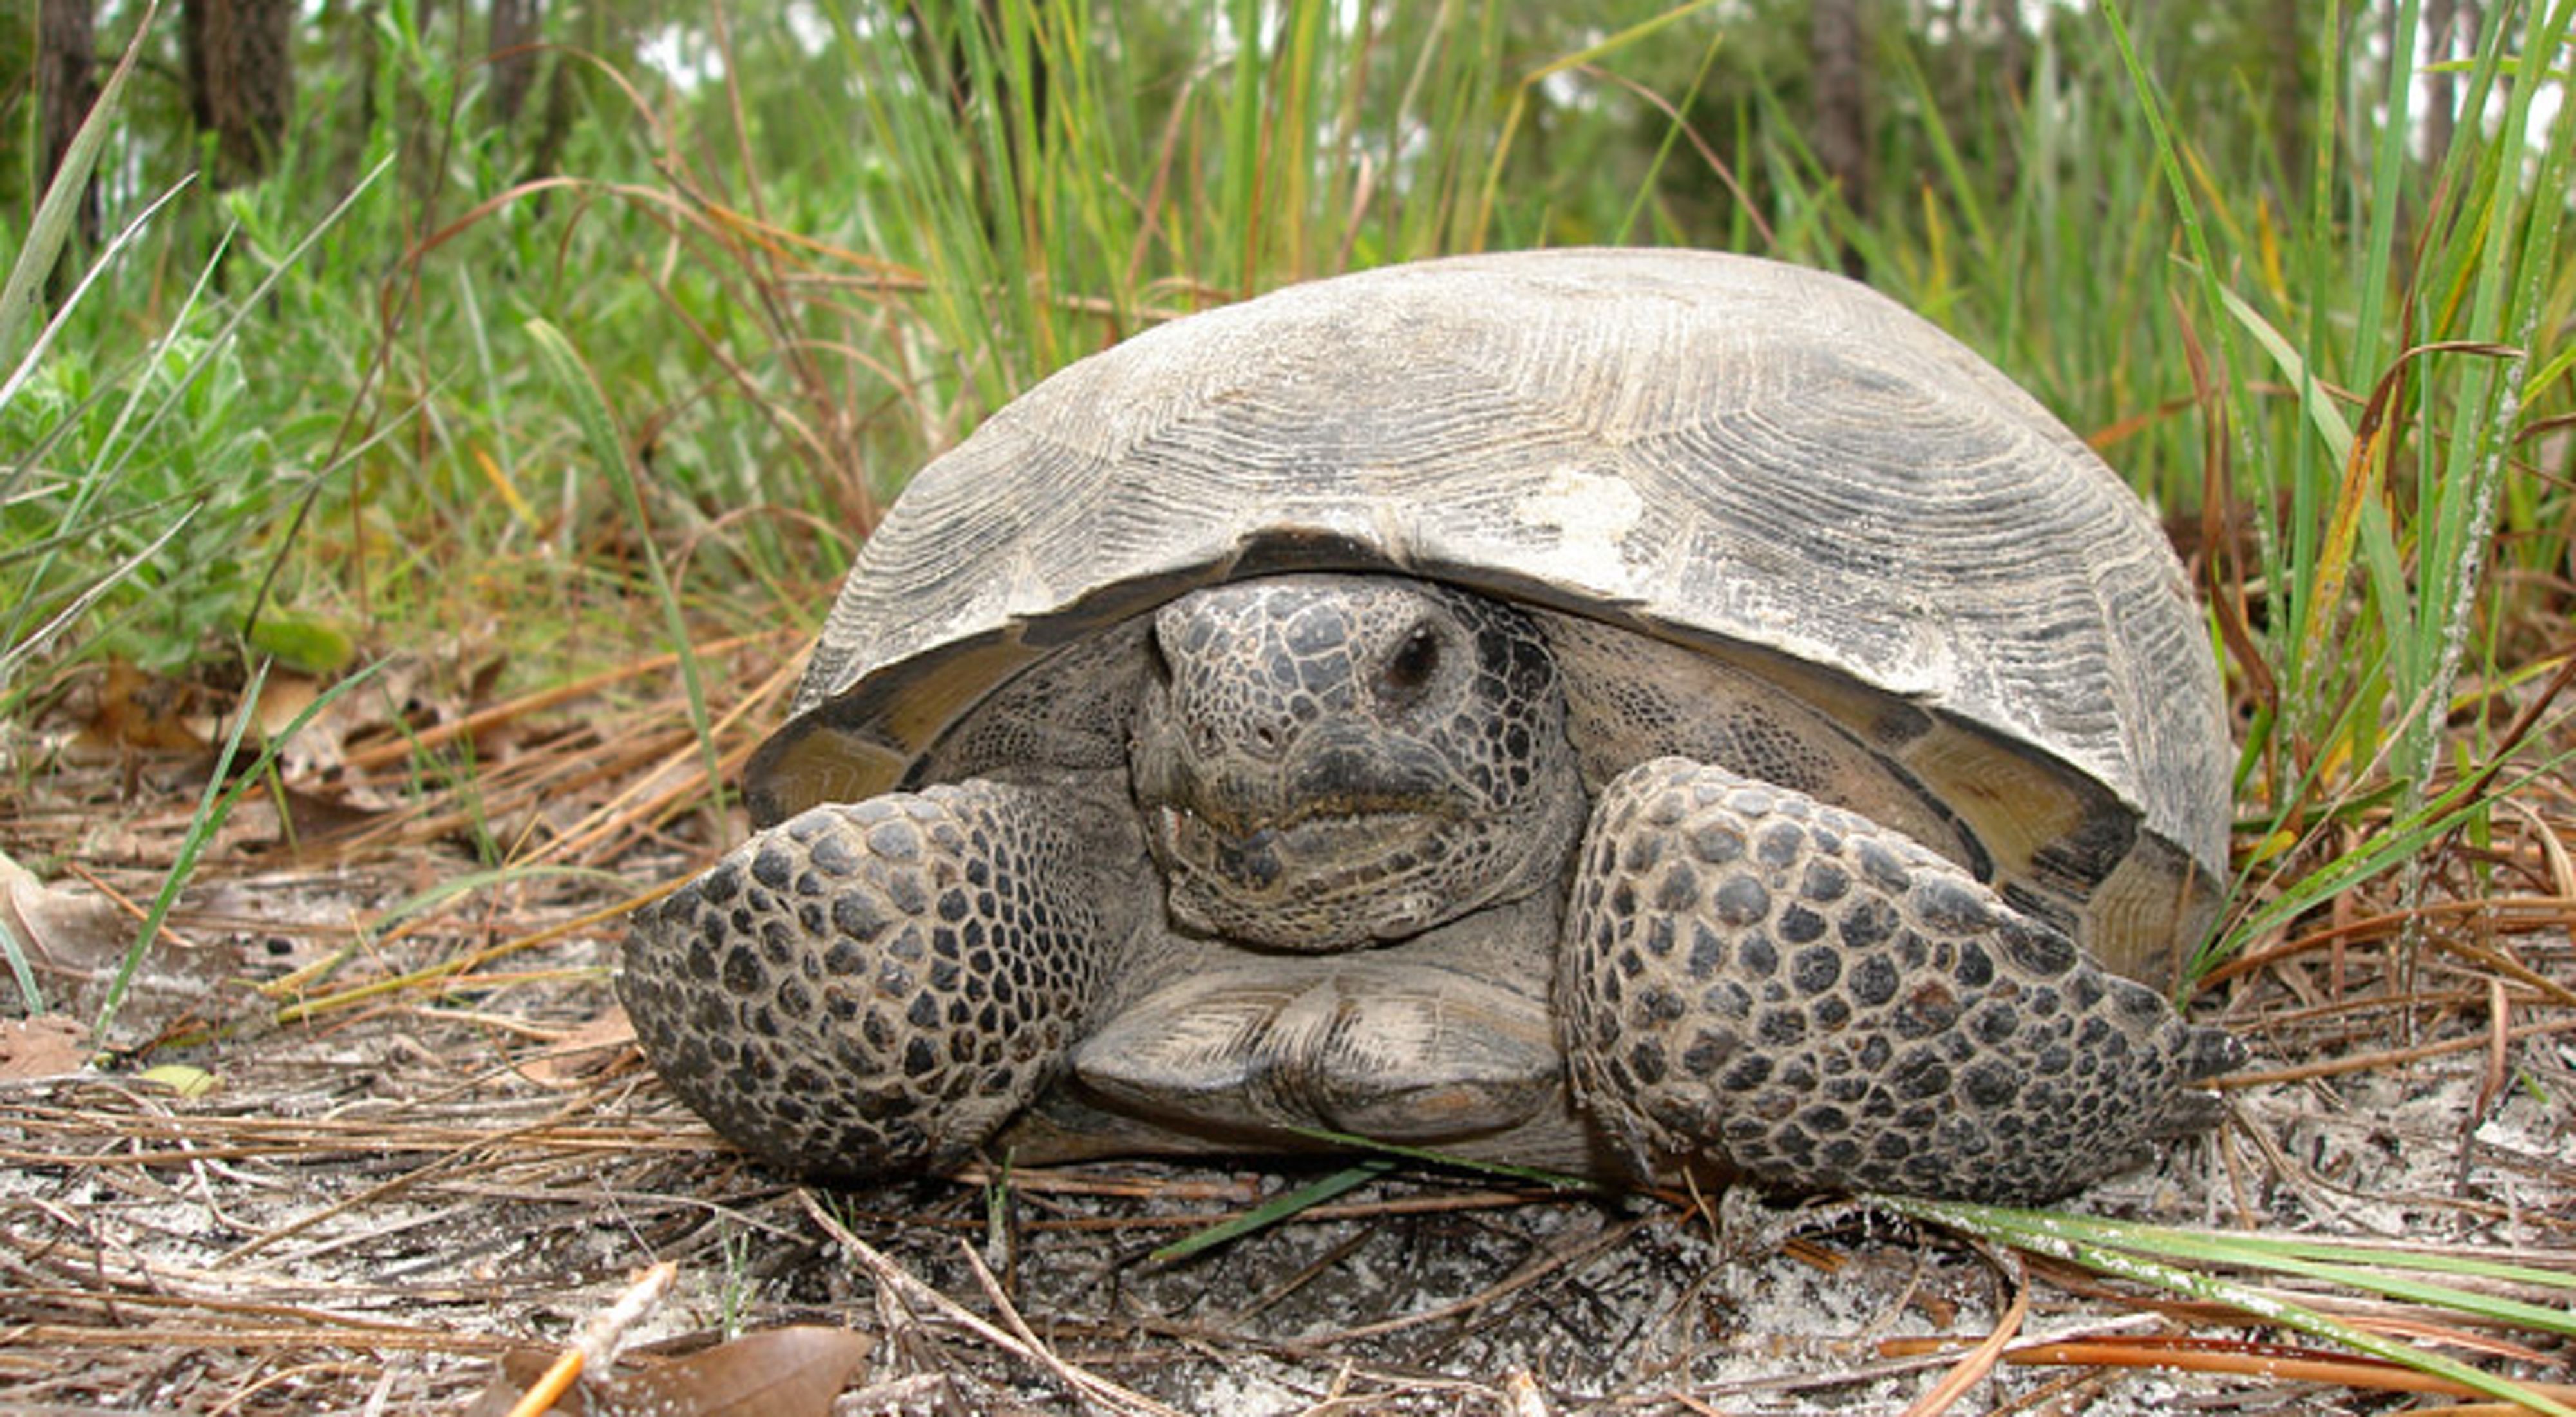 A gopher tortoise sitting on sandy ground surrounded by grass.